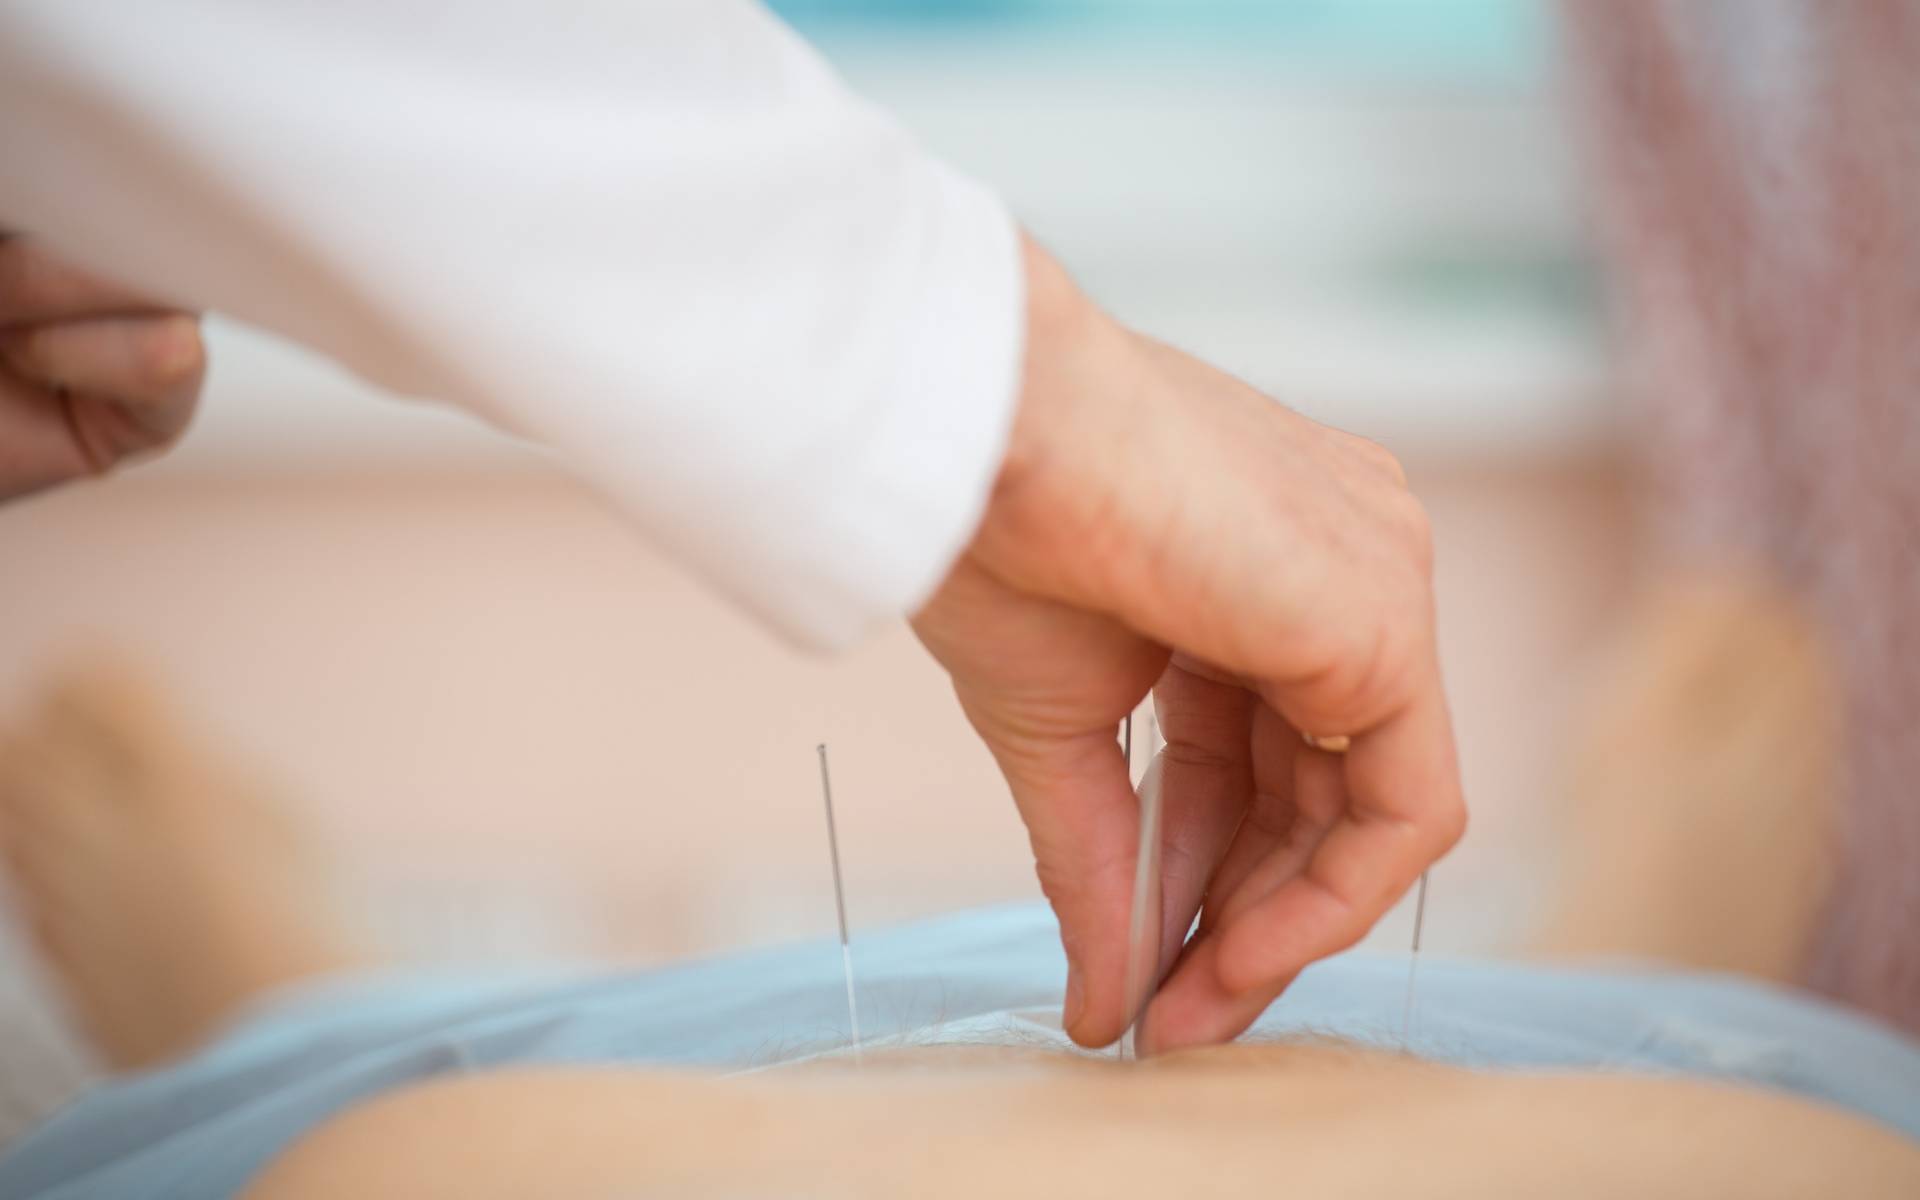 An image of a hand placing needles on the back of a patient during an acupuncture treatment.